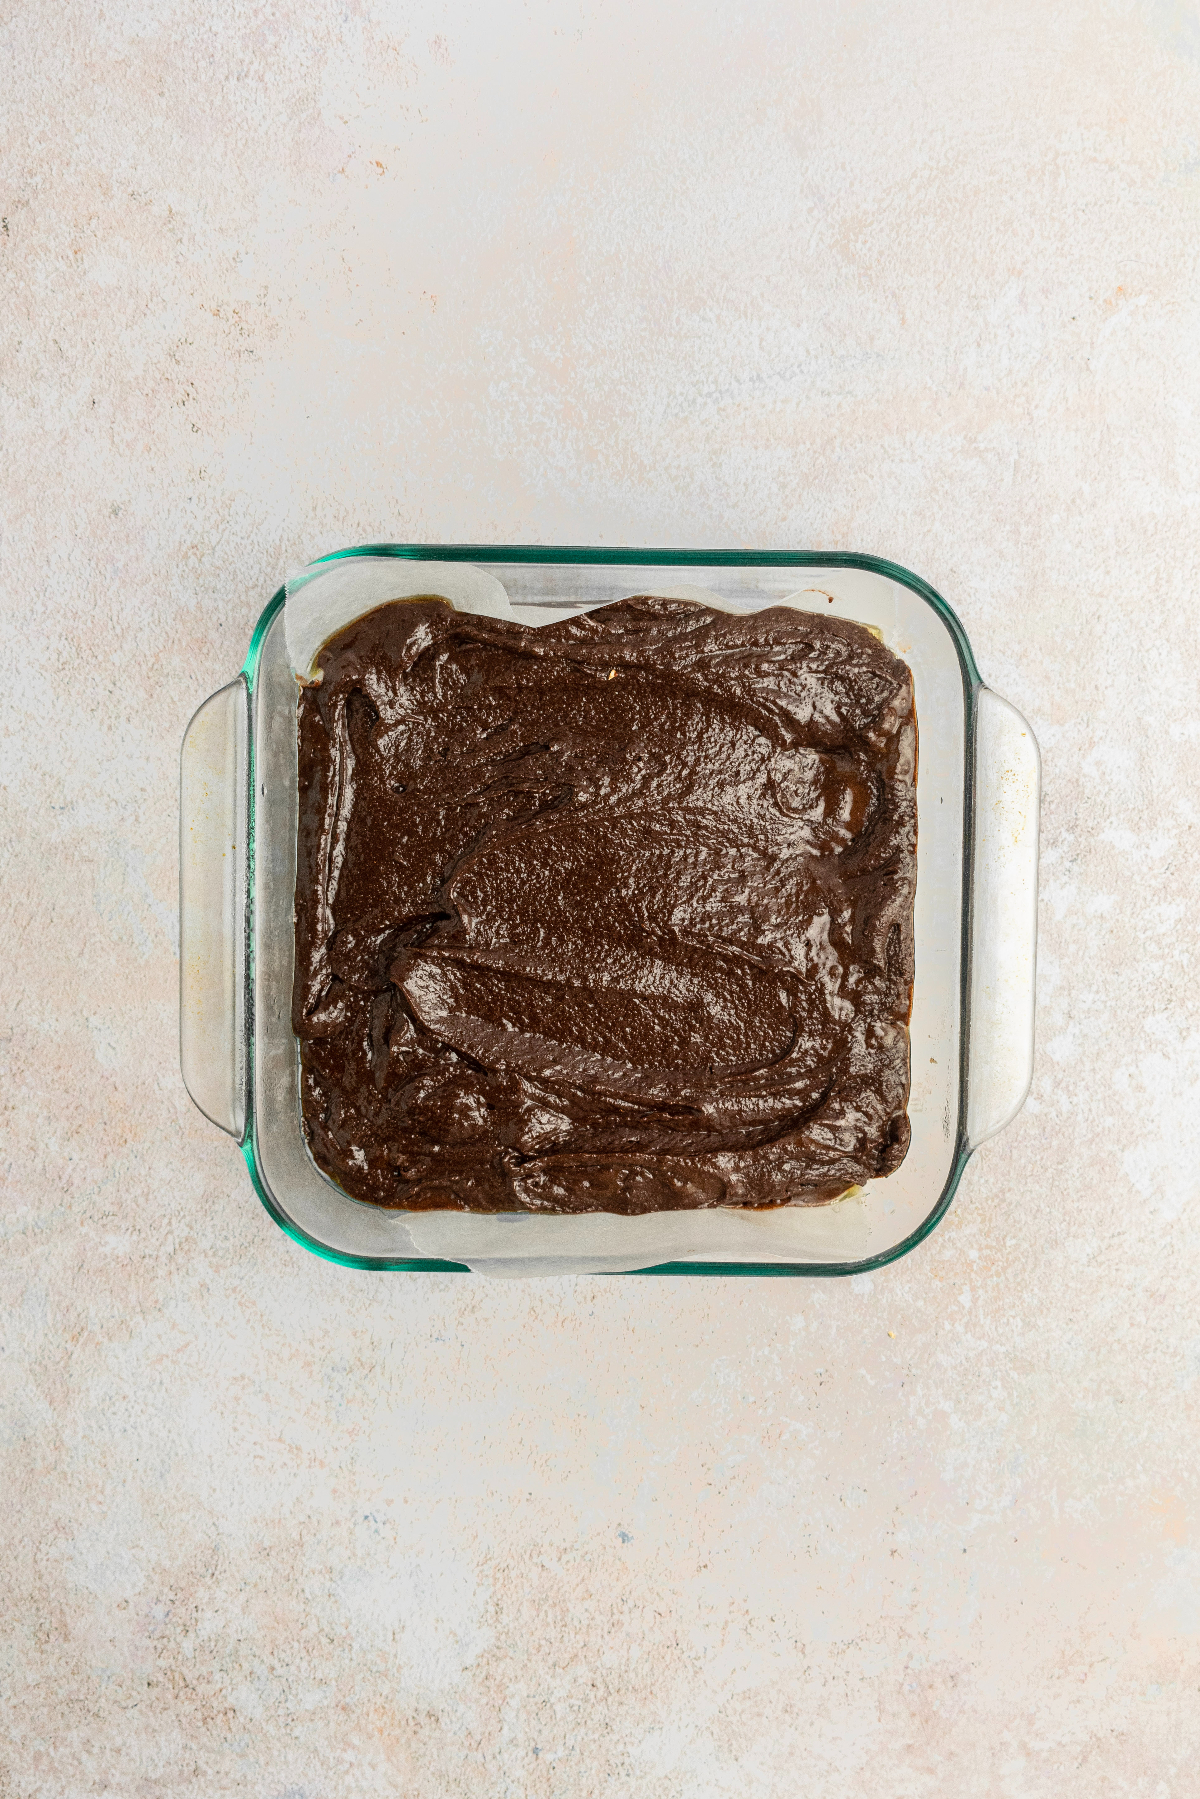 Smoothed out brownie batter in a glass baking pan.